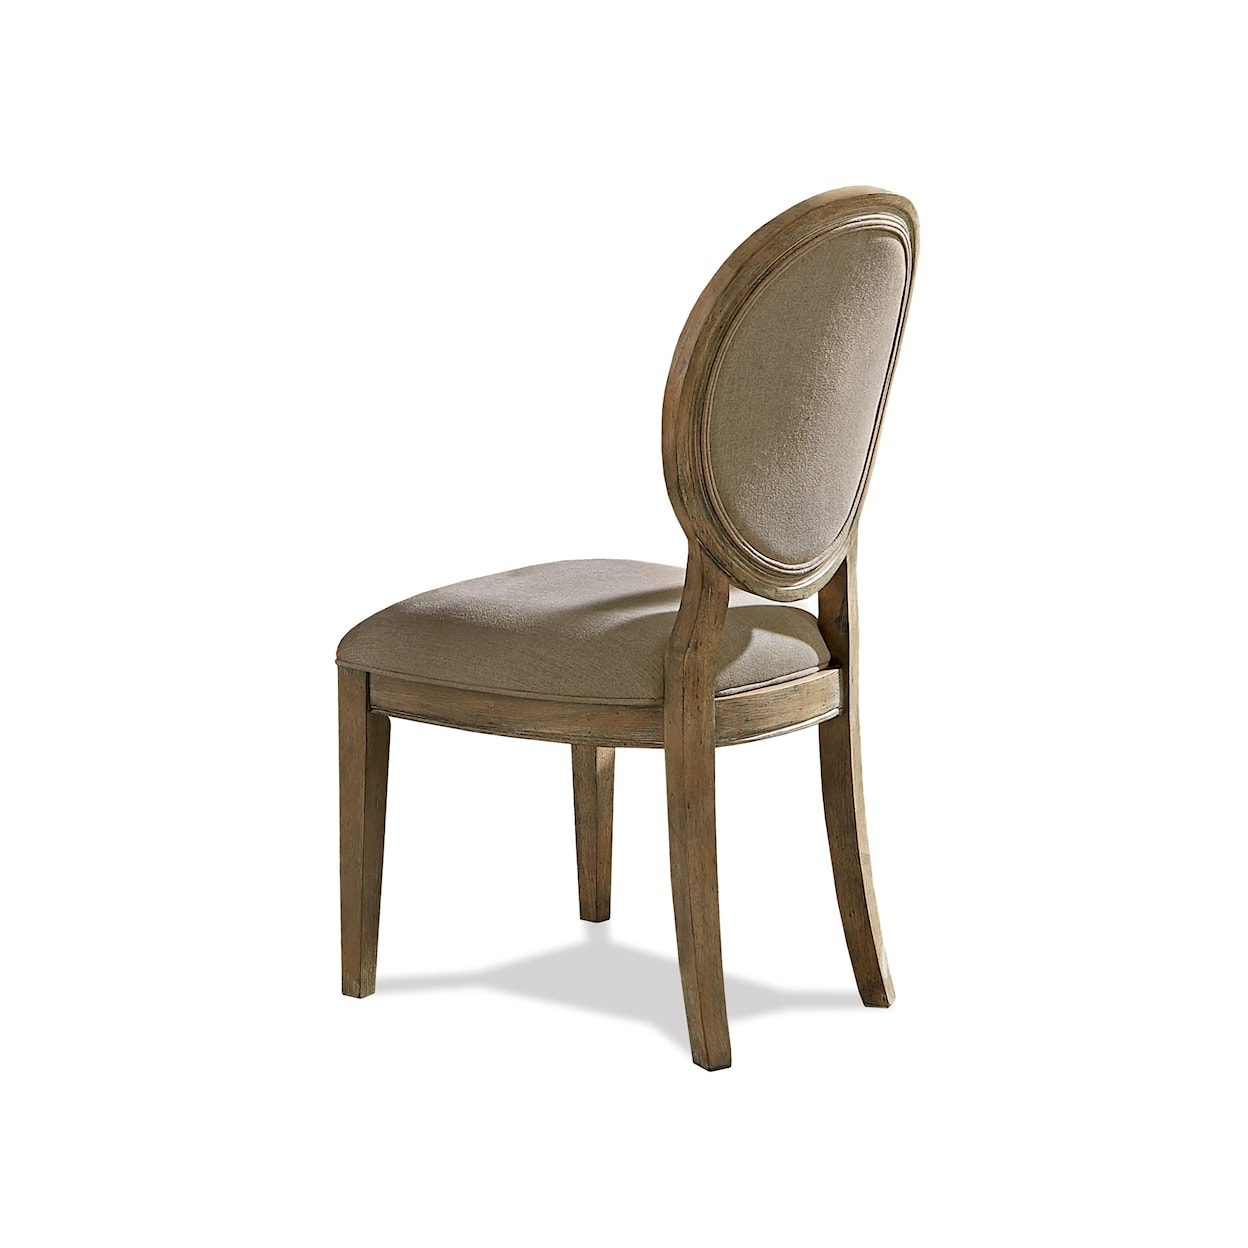 Riverside Furniture Sonora Upholstered Oval Side Chair